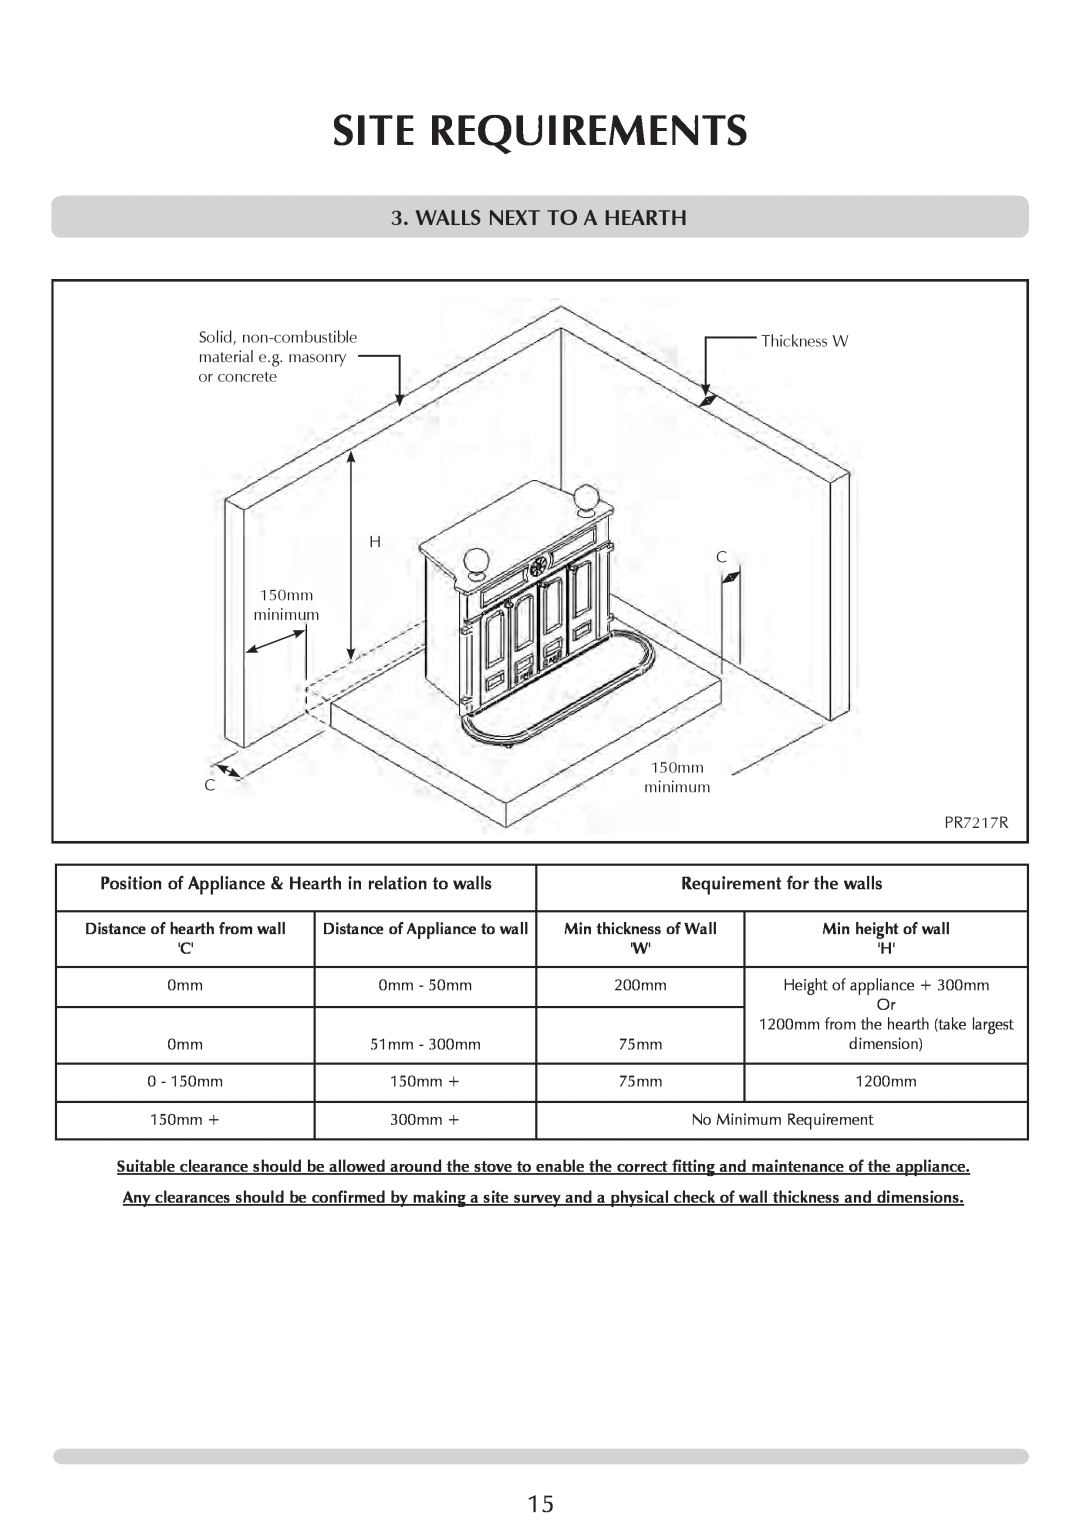 Stovax 1002, 1001 Walls Next To A Hearth, Position of Appliance & Hearth in relation to walls, Requirement for the walls 